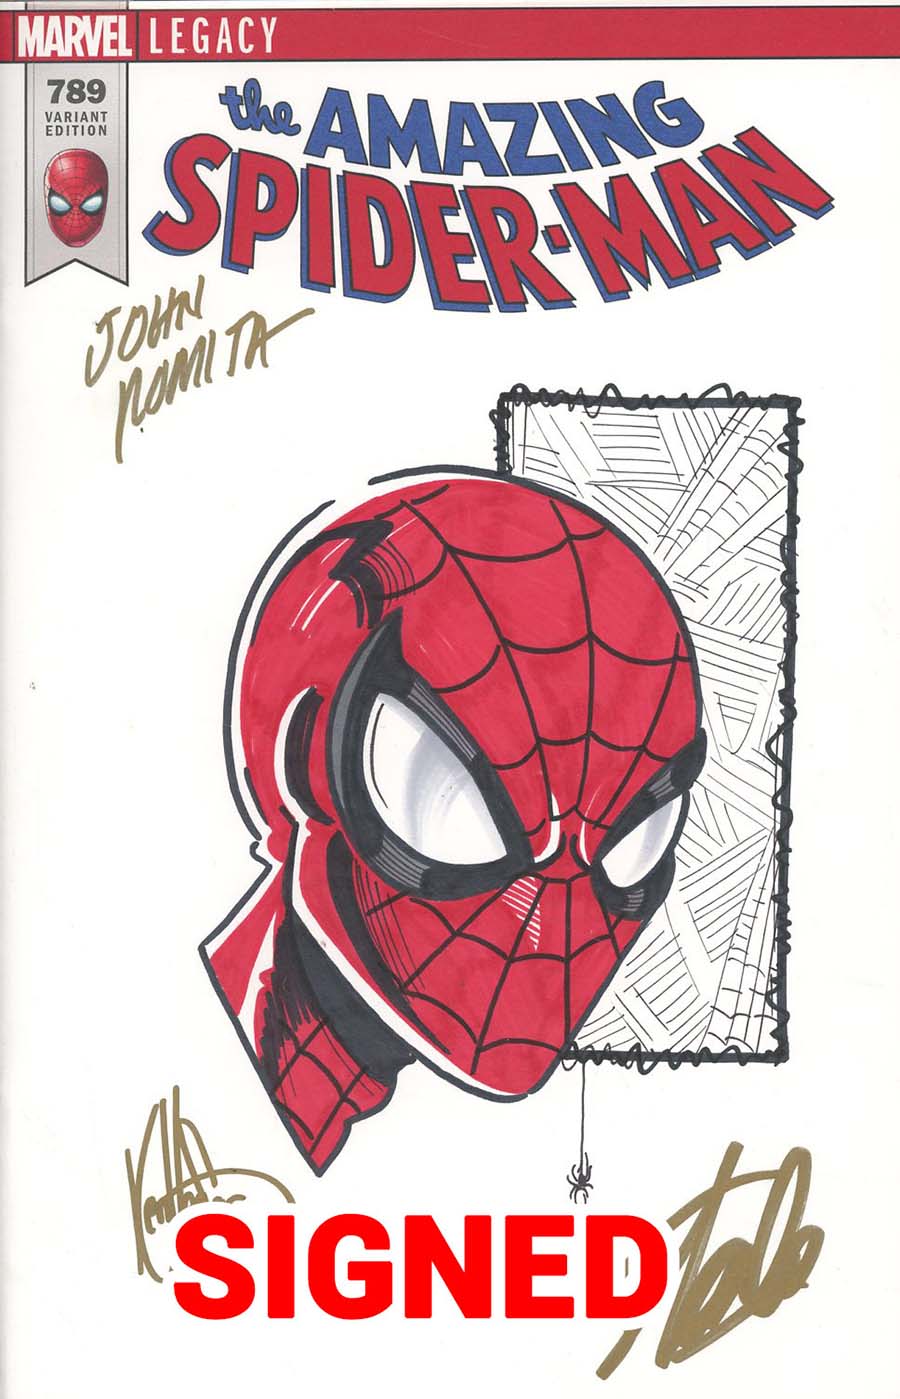 Amazing Spider-Man Vol 4 #789 Cover I DF Remarked With A Ken Haeser Sketch & Signed By Stan Lee & John Romita Sr (Marvel Legacy Tie-In)